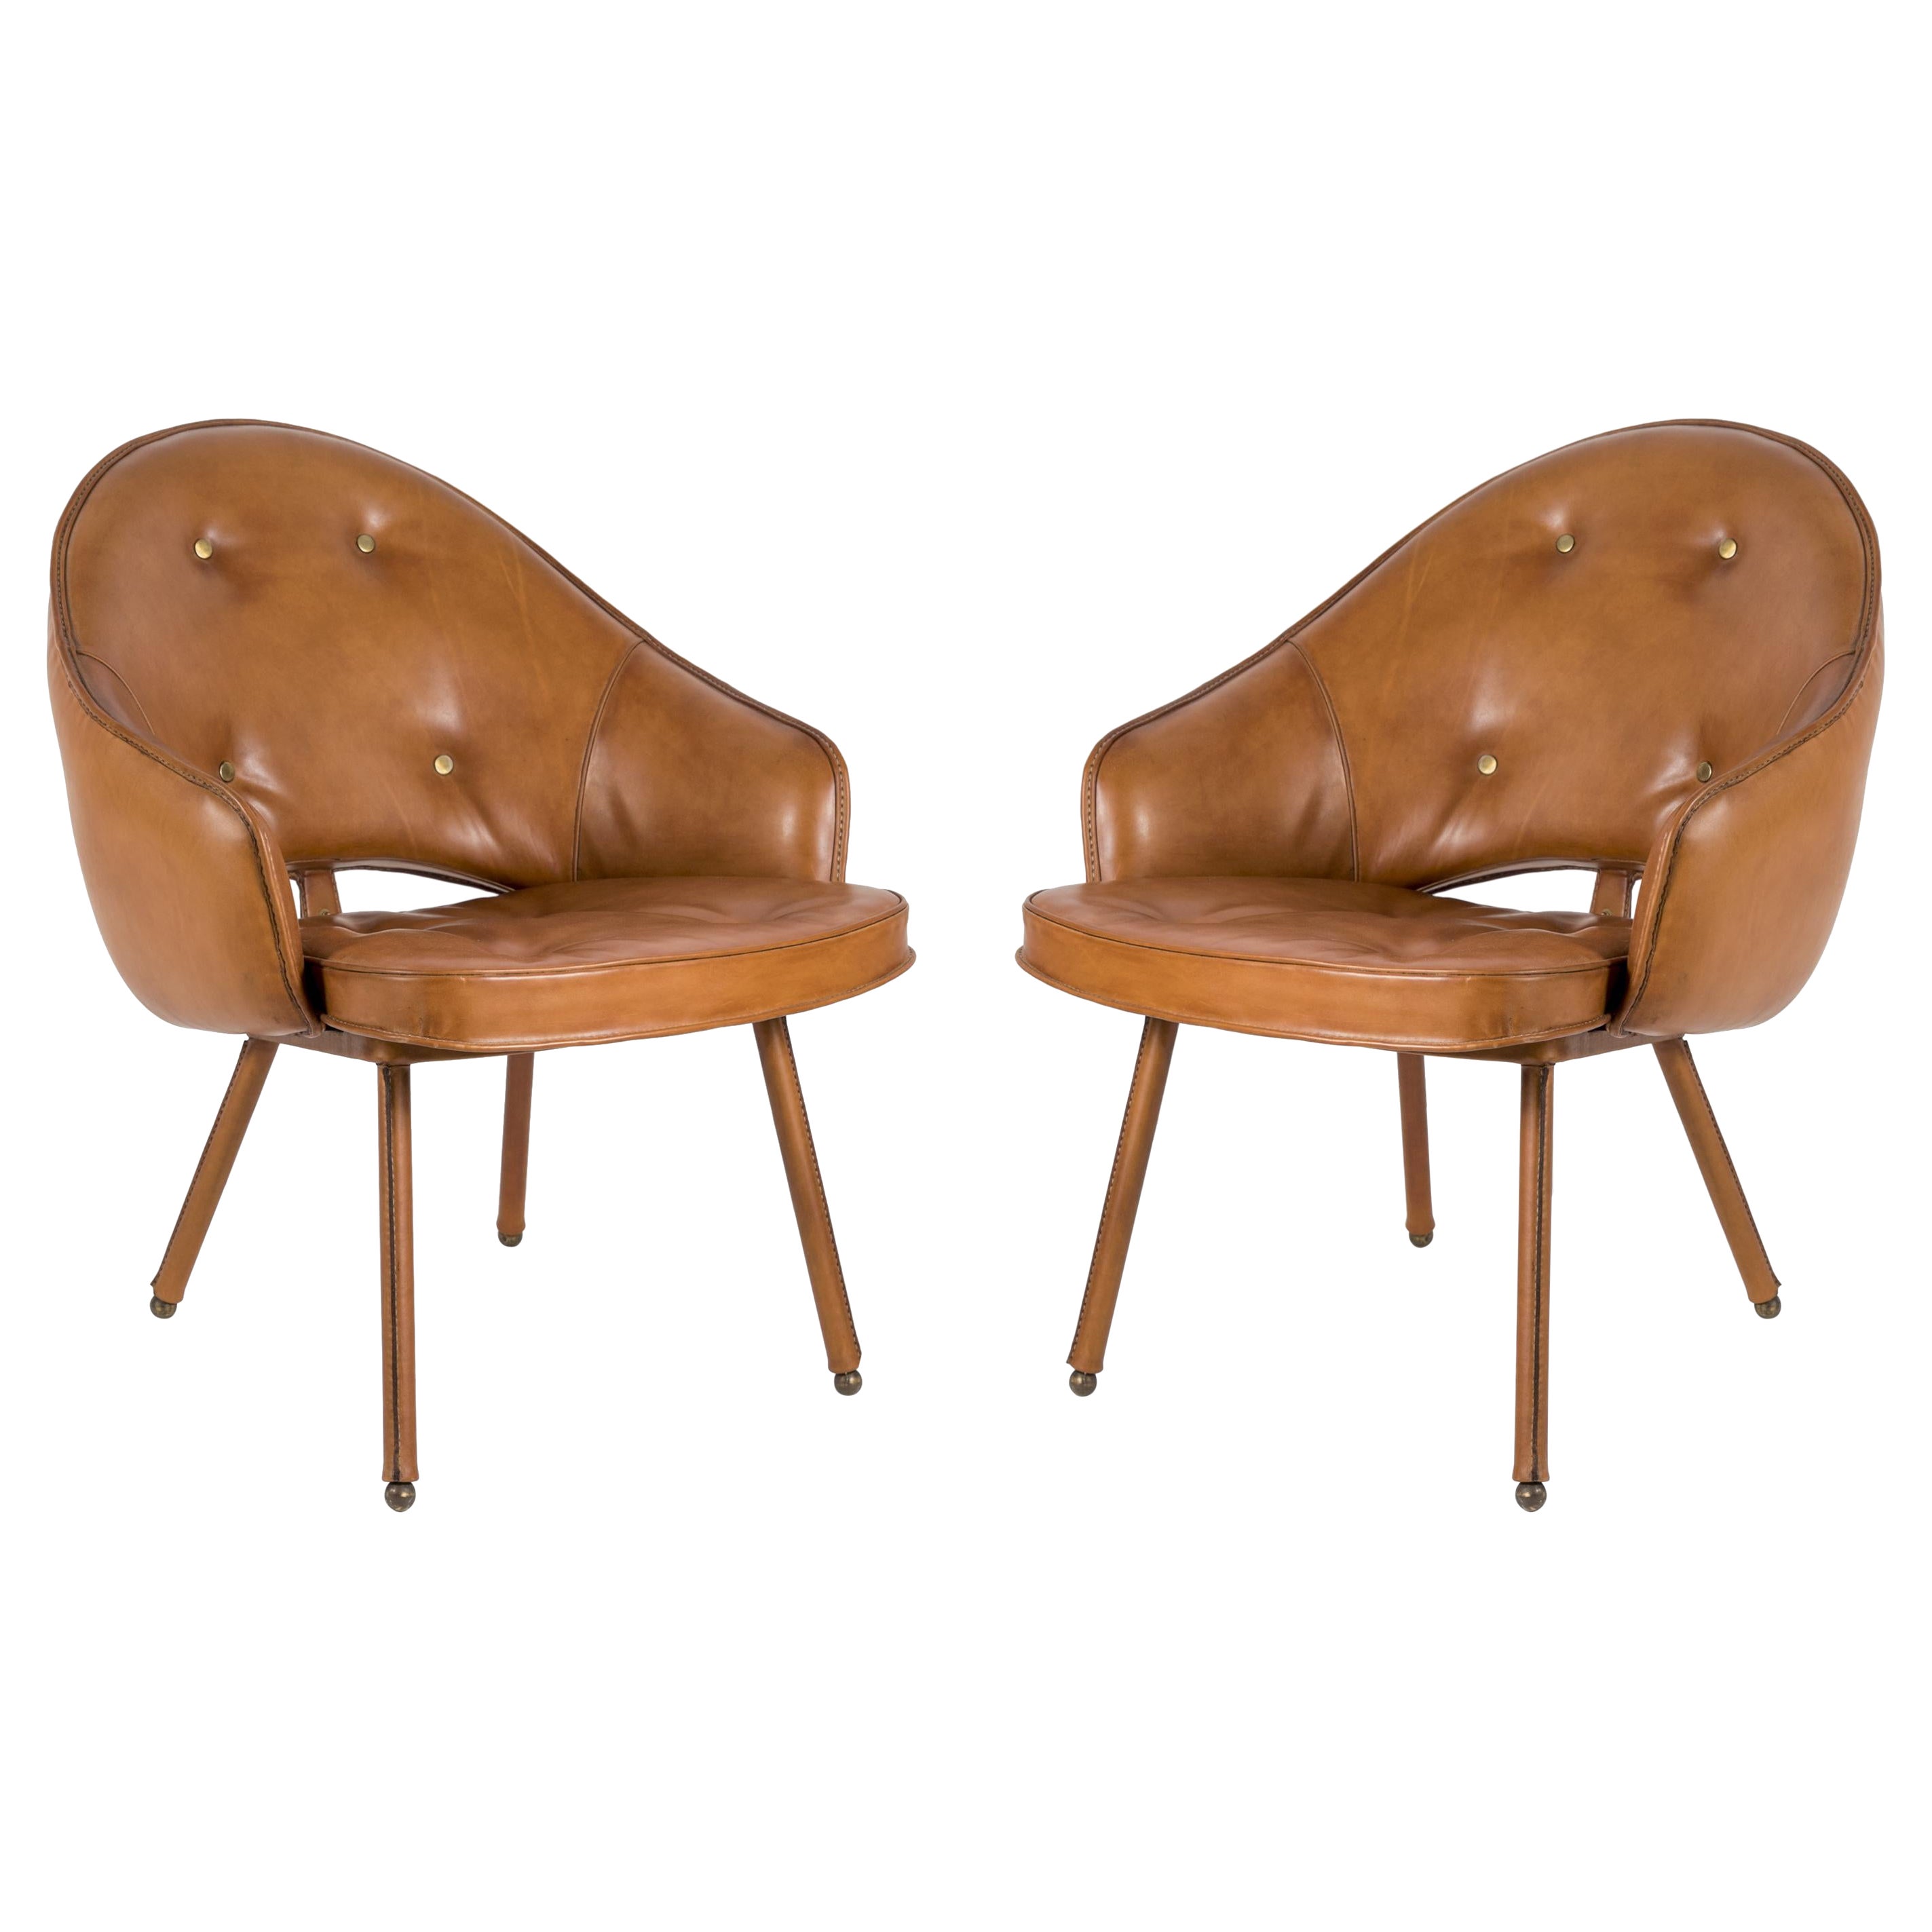 Pair of 1950's Stitched Leather Armchairs by Jacques Adnet